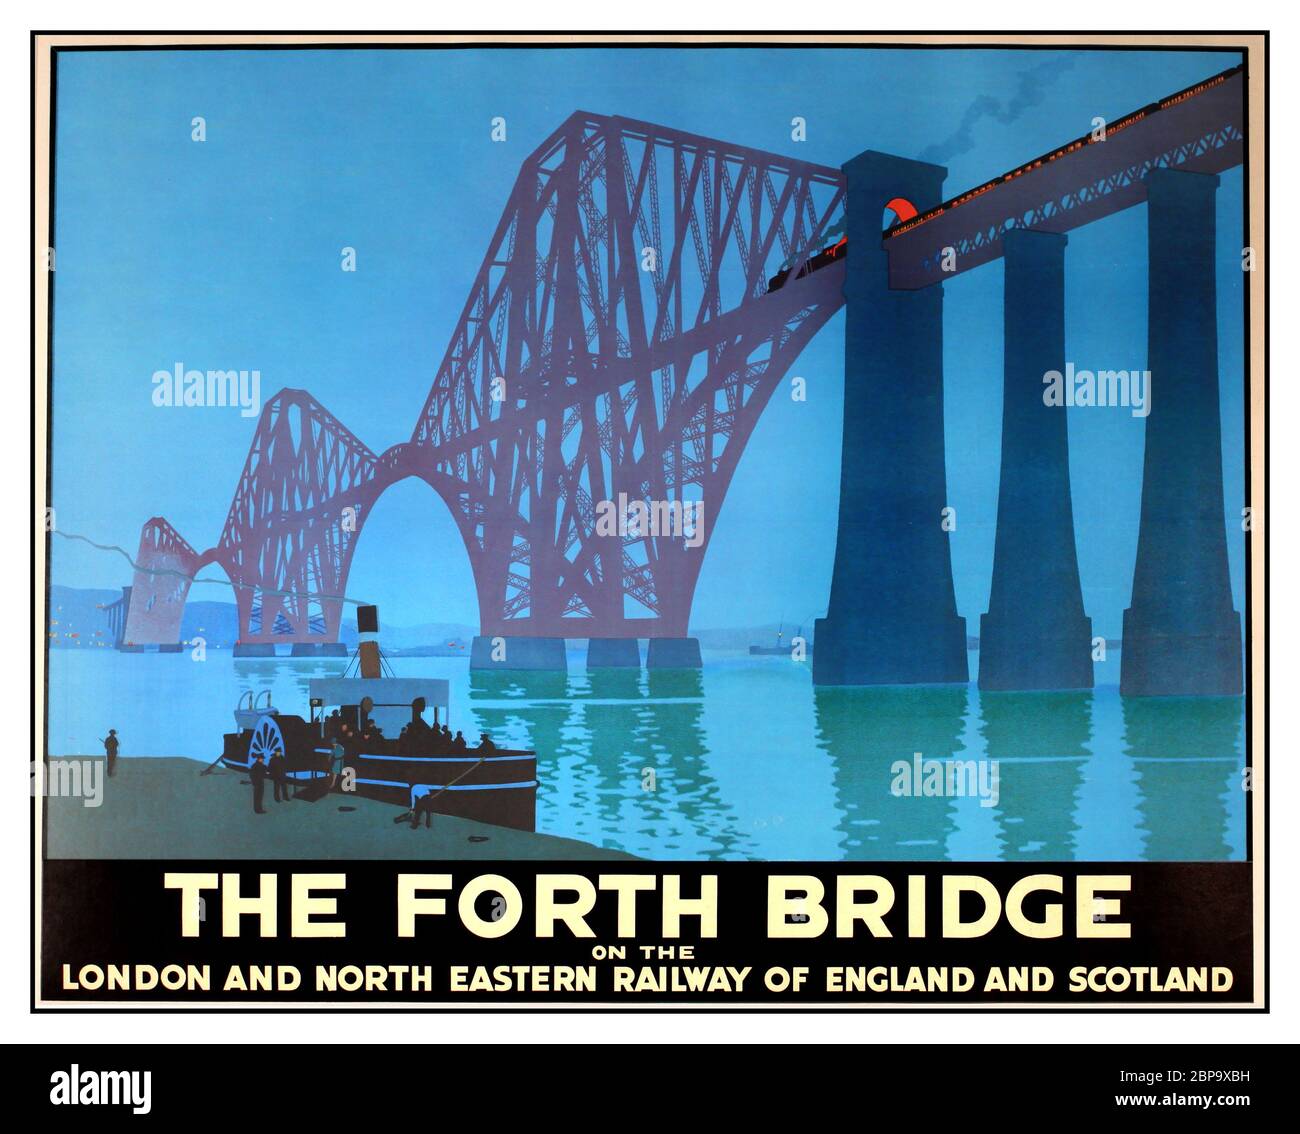 Vintage 1900's rail travel poster The Forth Bridge LNER 1928 Lithograph by H G Gawthorn (1879-1941) London and North Eastern Railway of England and Scotland Stock Photo